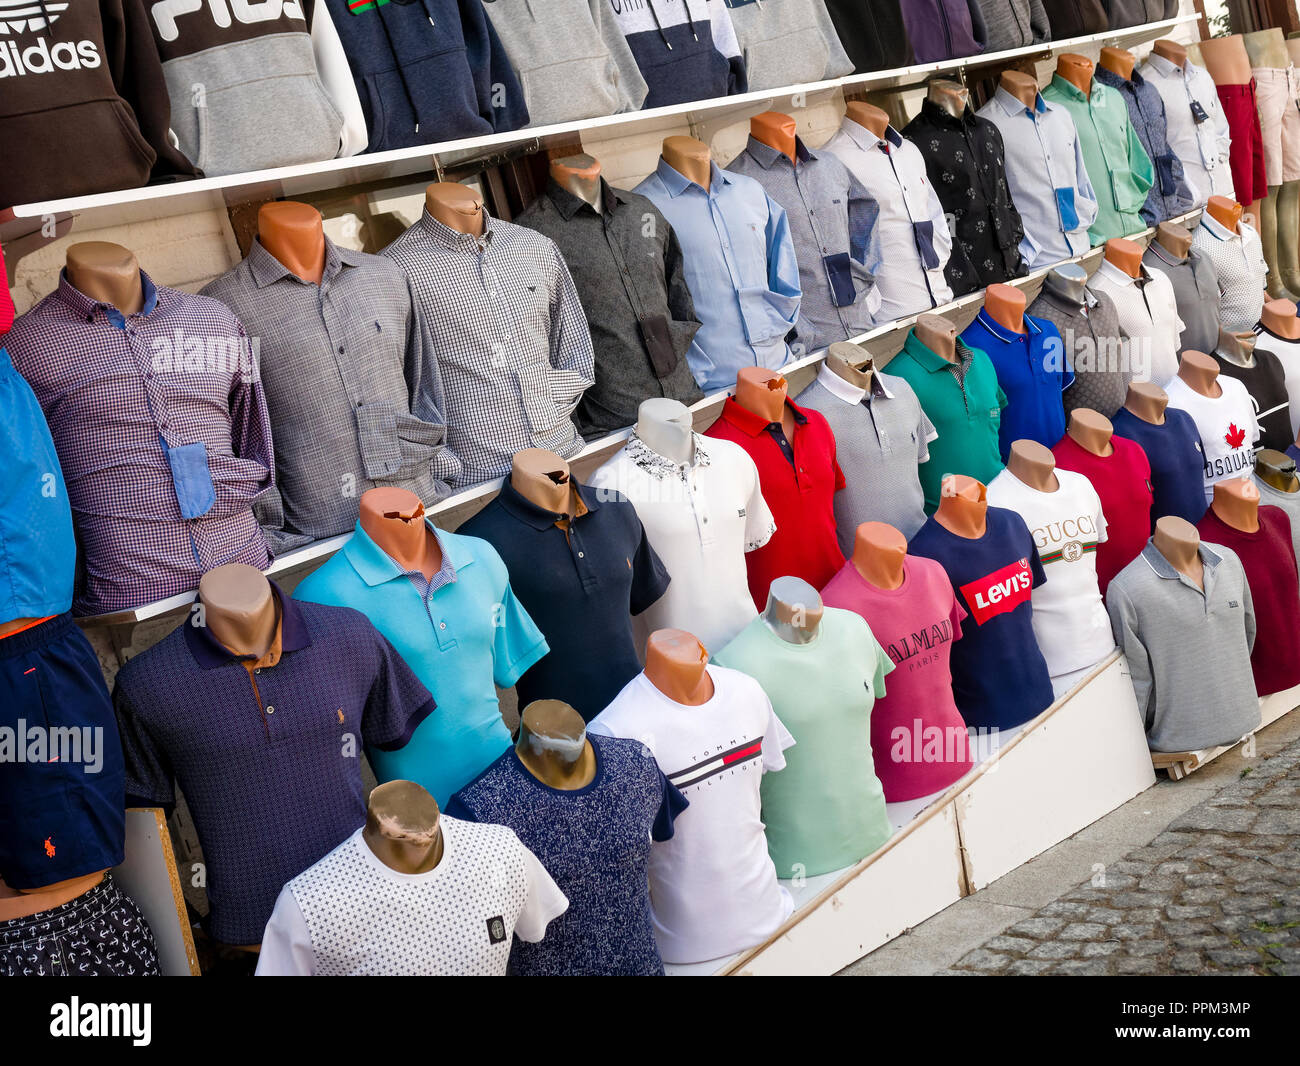 Counterfeit or fake designer clothing for sale outside shop in the busy harbour area of Kalkan Stock Photo